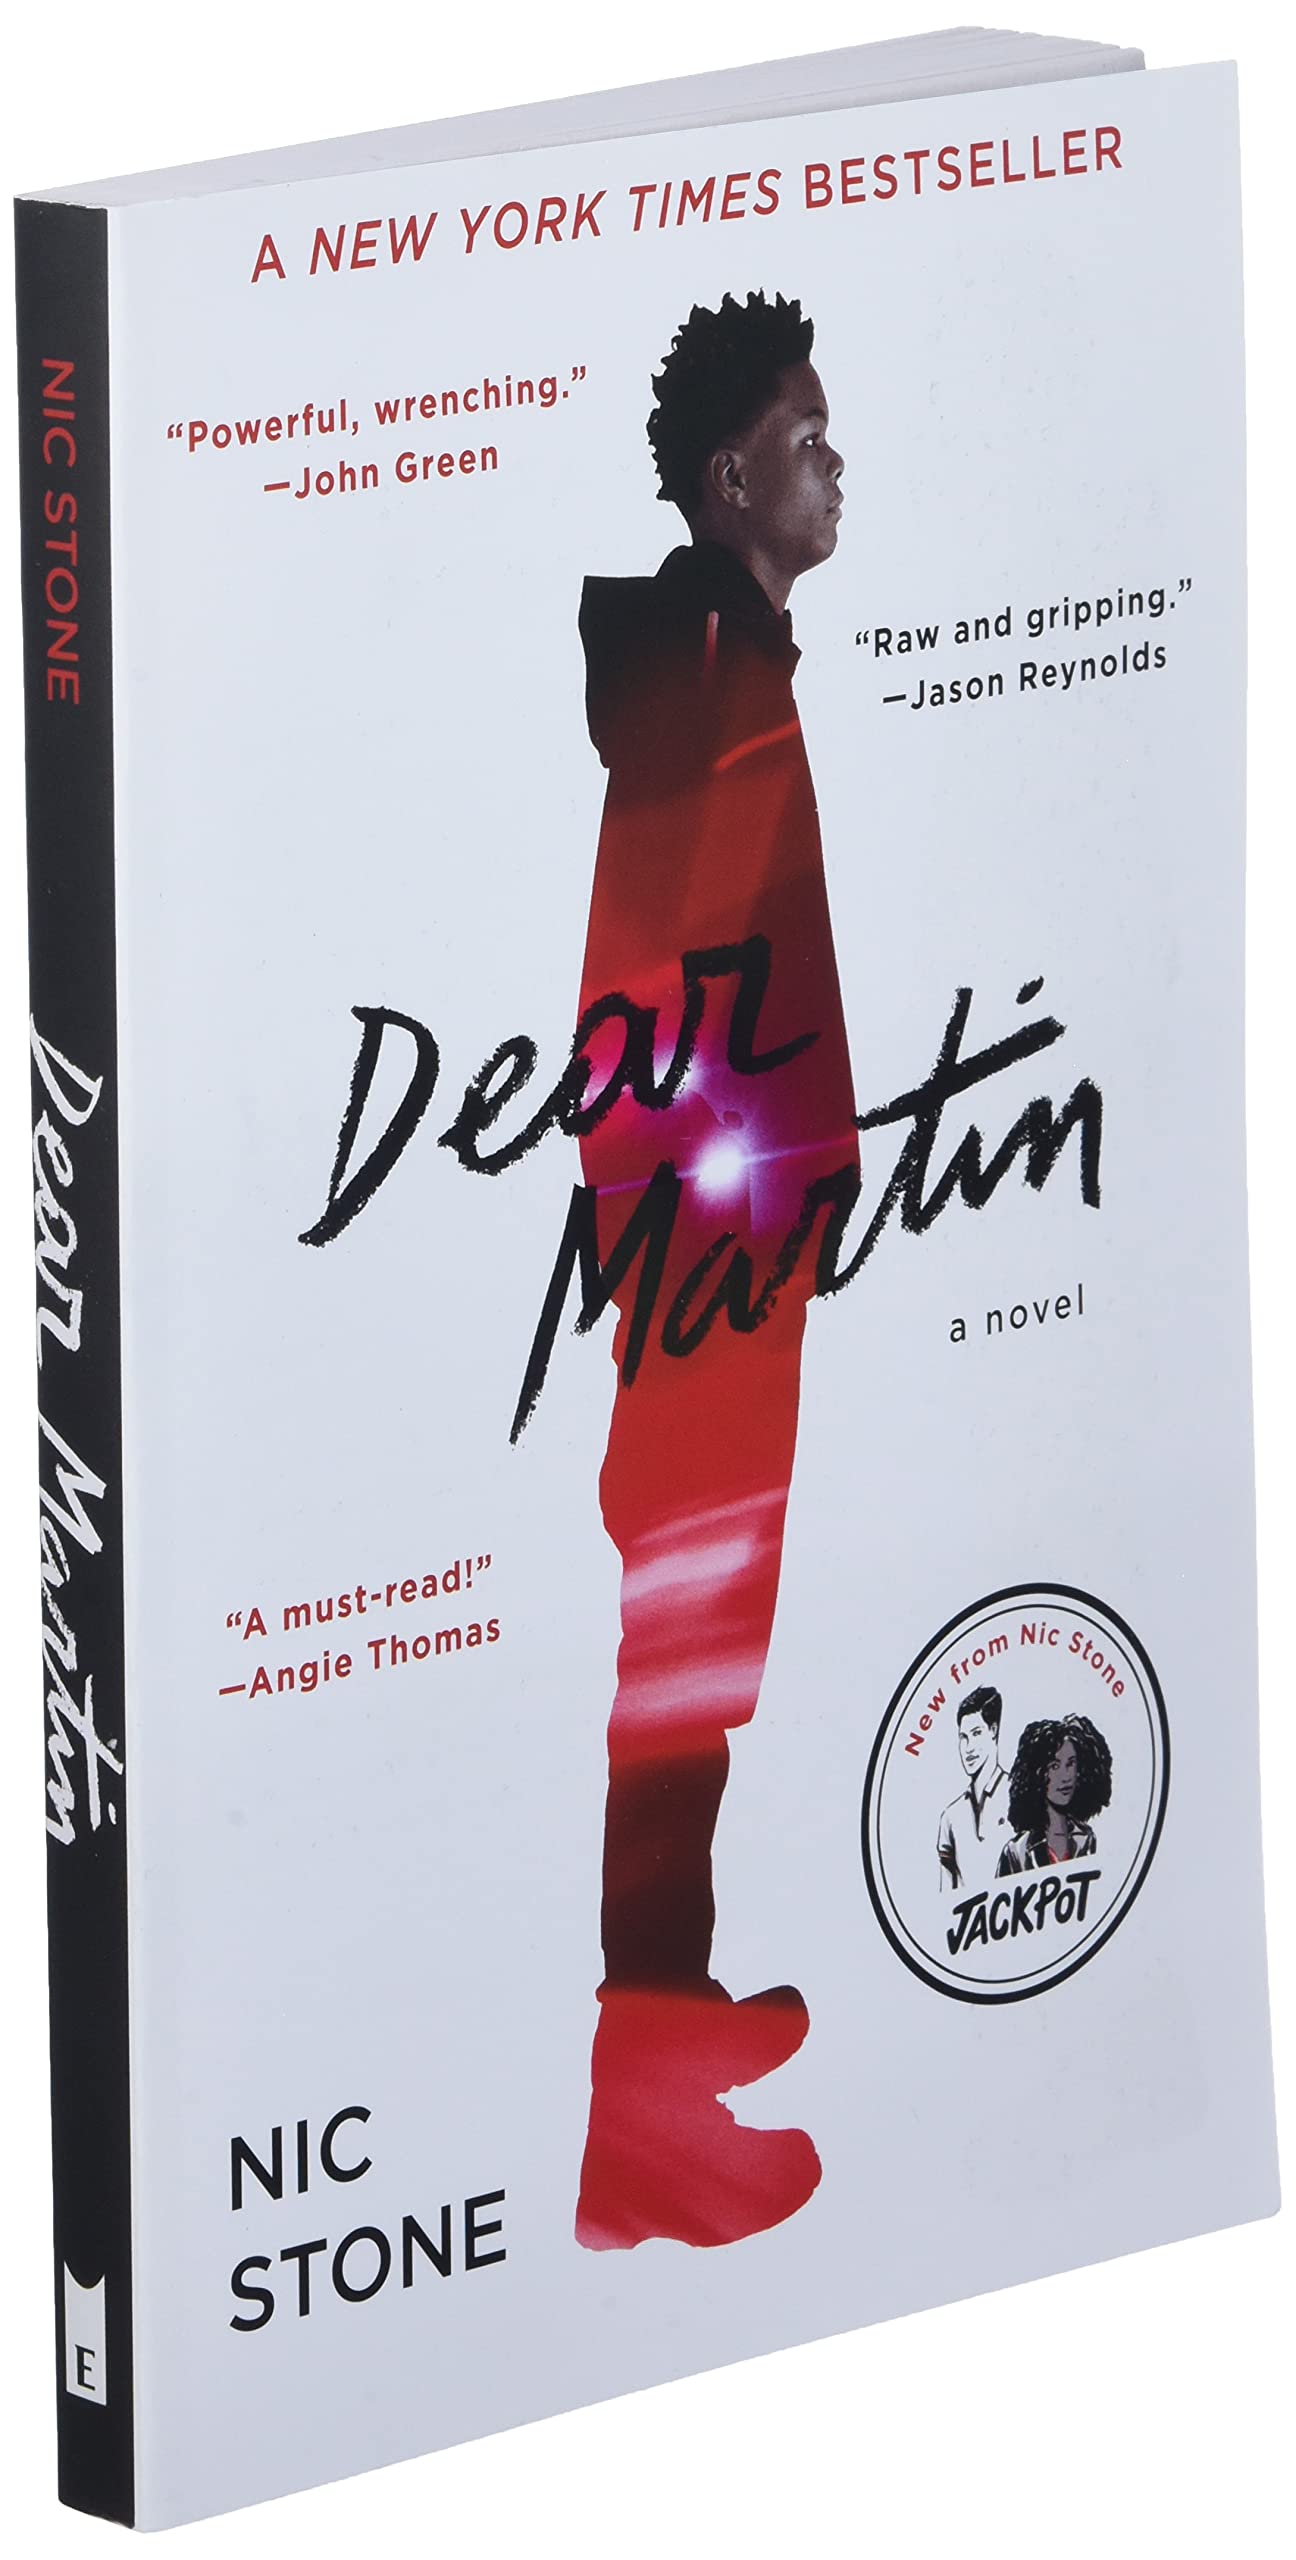 Dear Martin Paperback by Nic Stone, 9781101939529